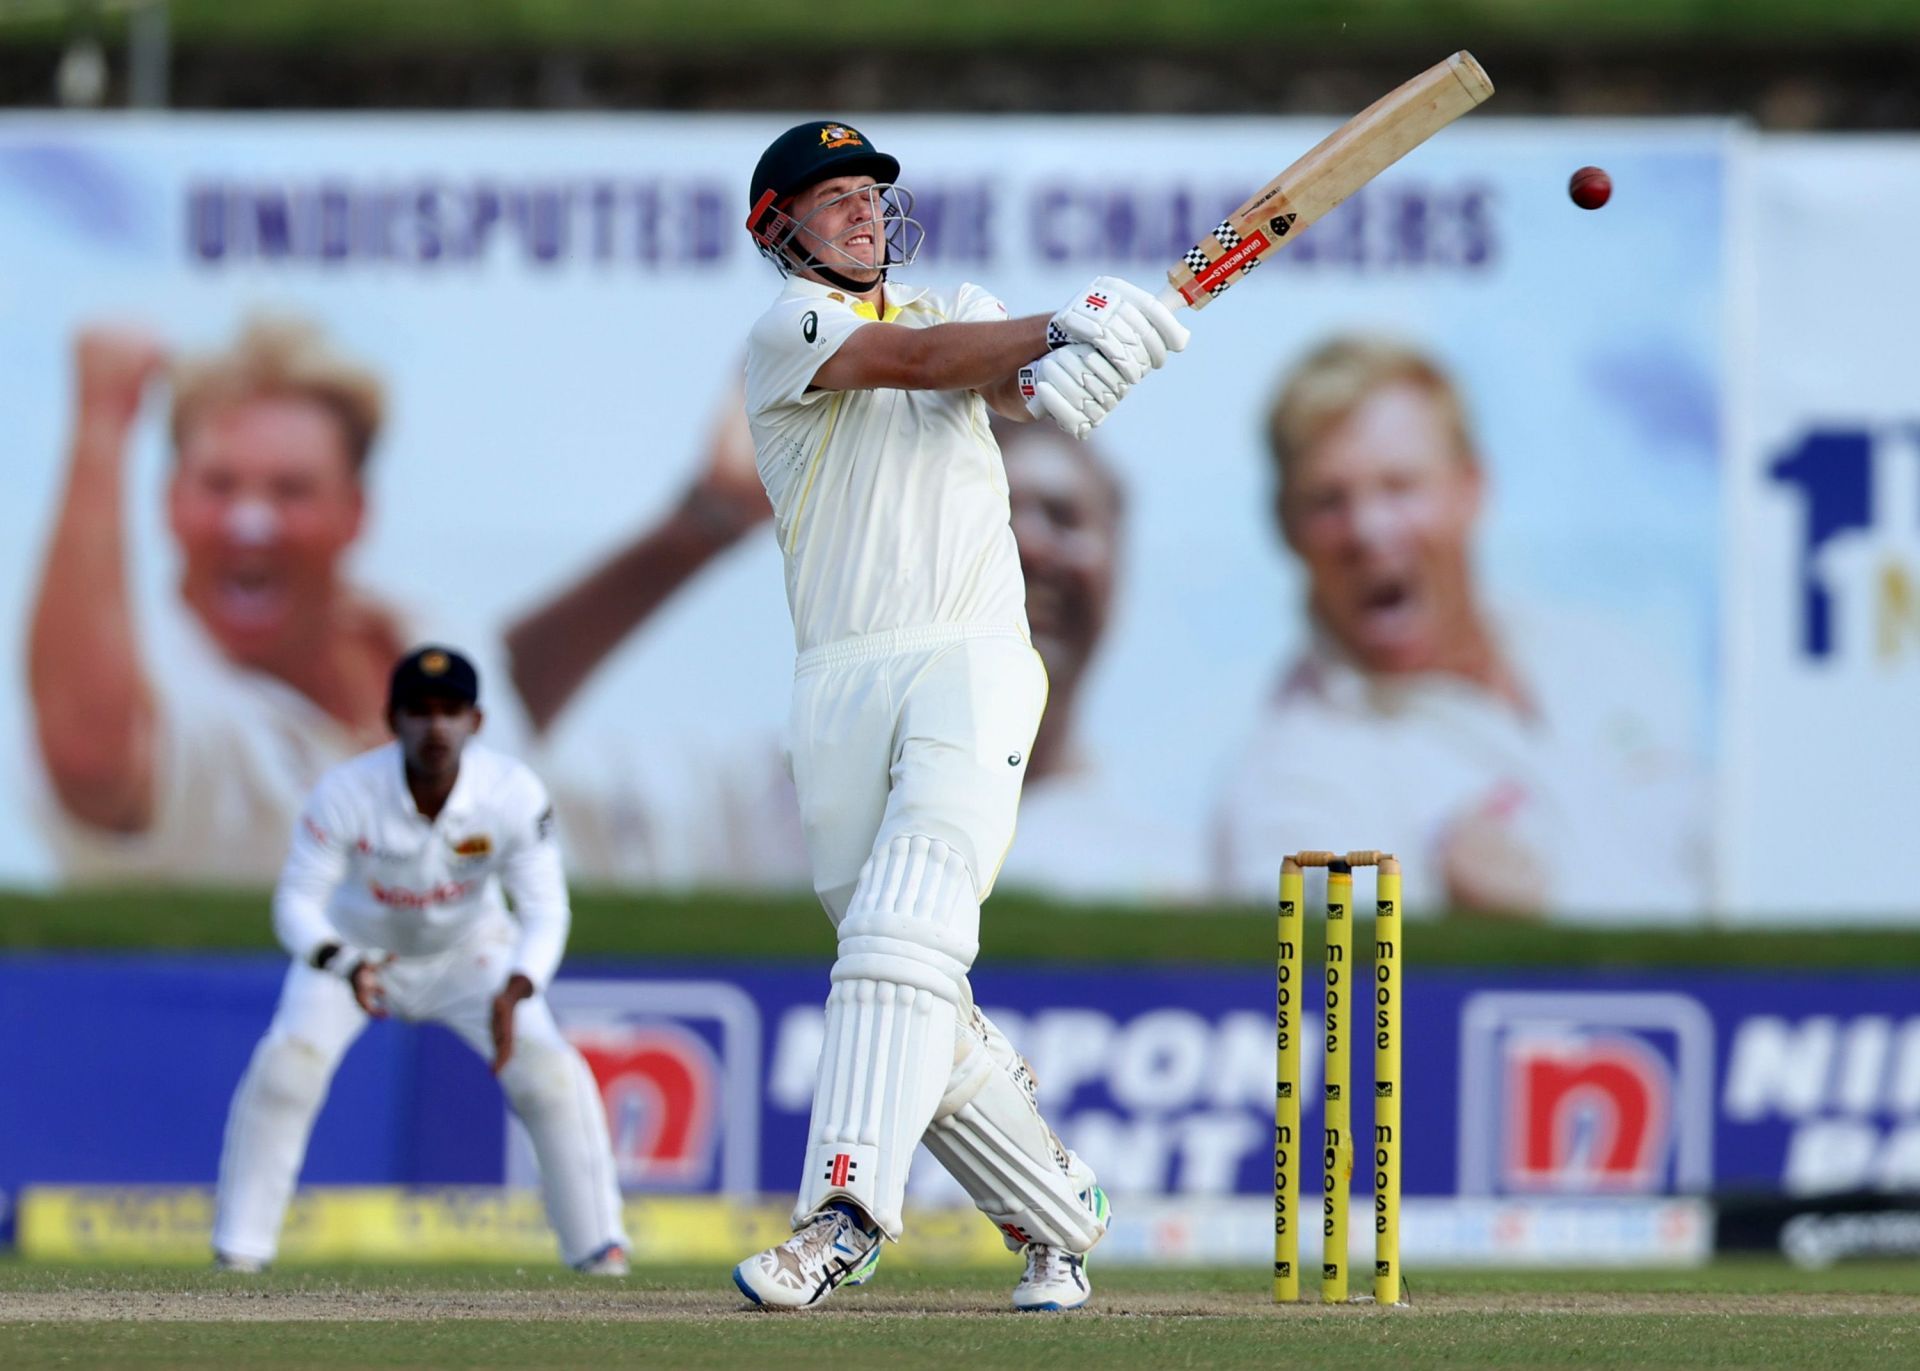 Cameron Green smashed six fours in his match-winning knock against Sri Lanka (Image Courtesy: Getty Images)